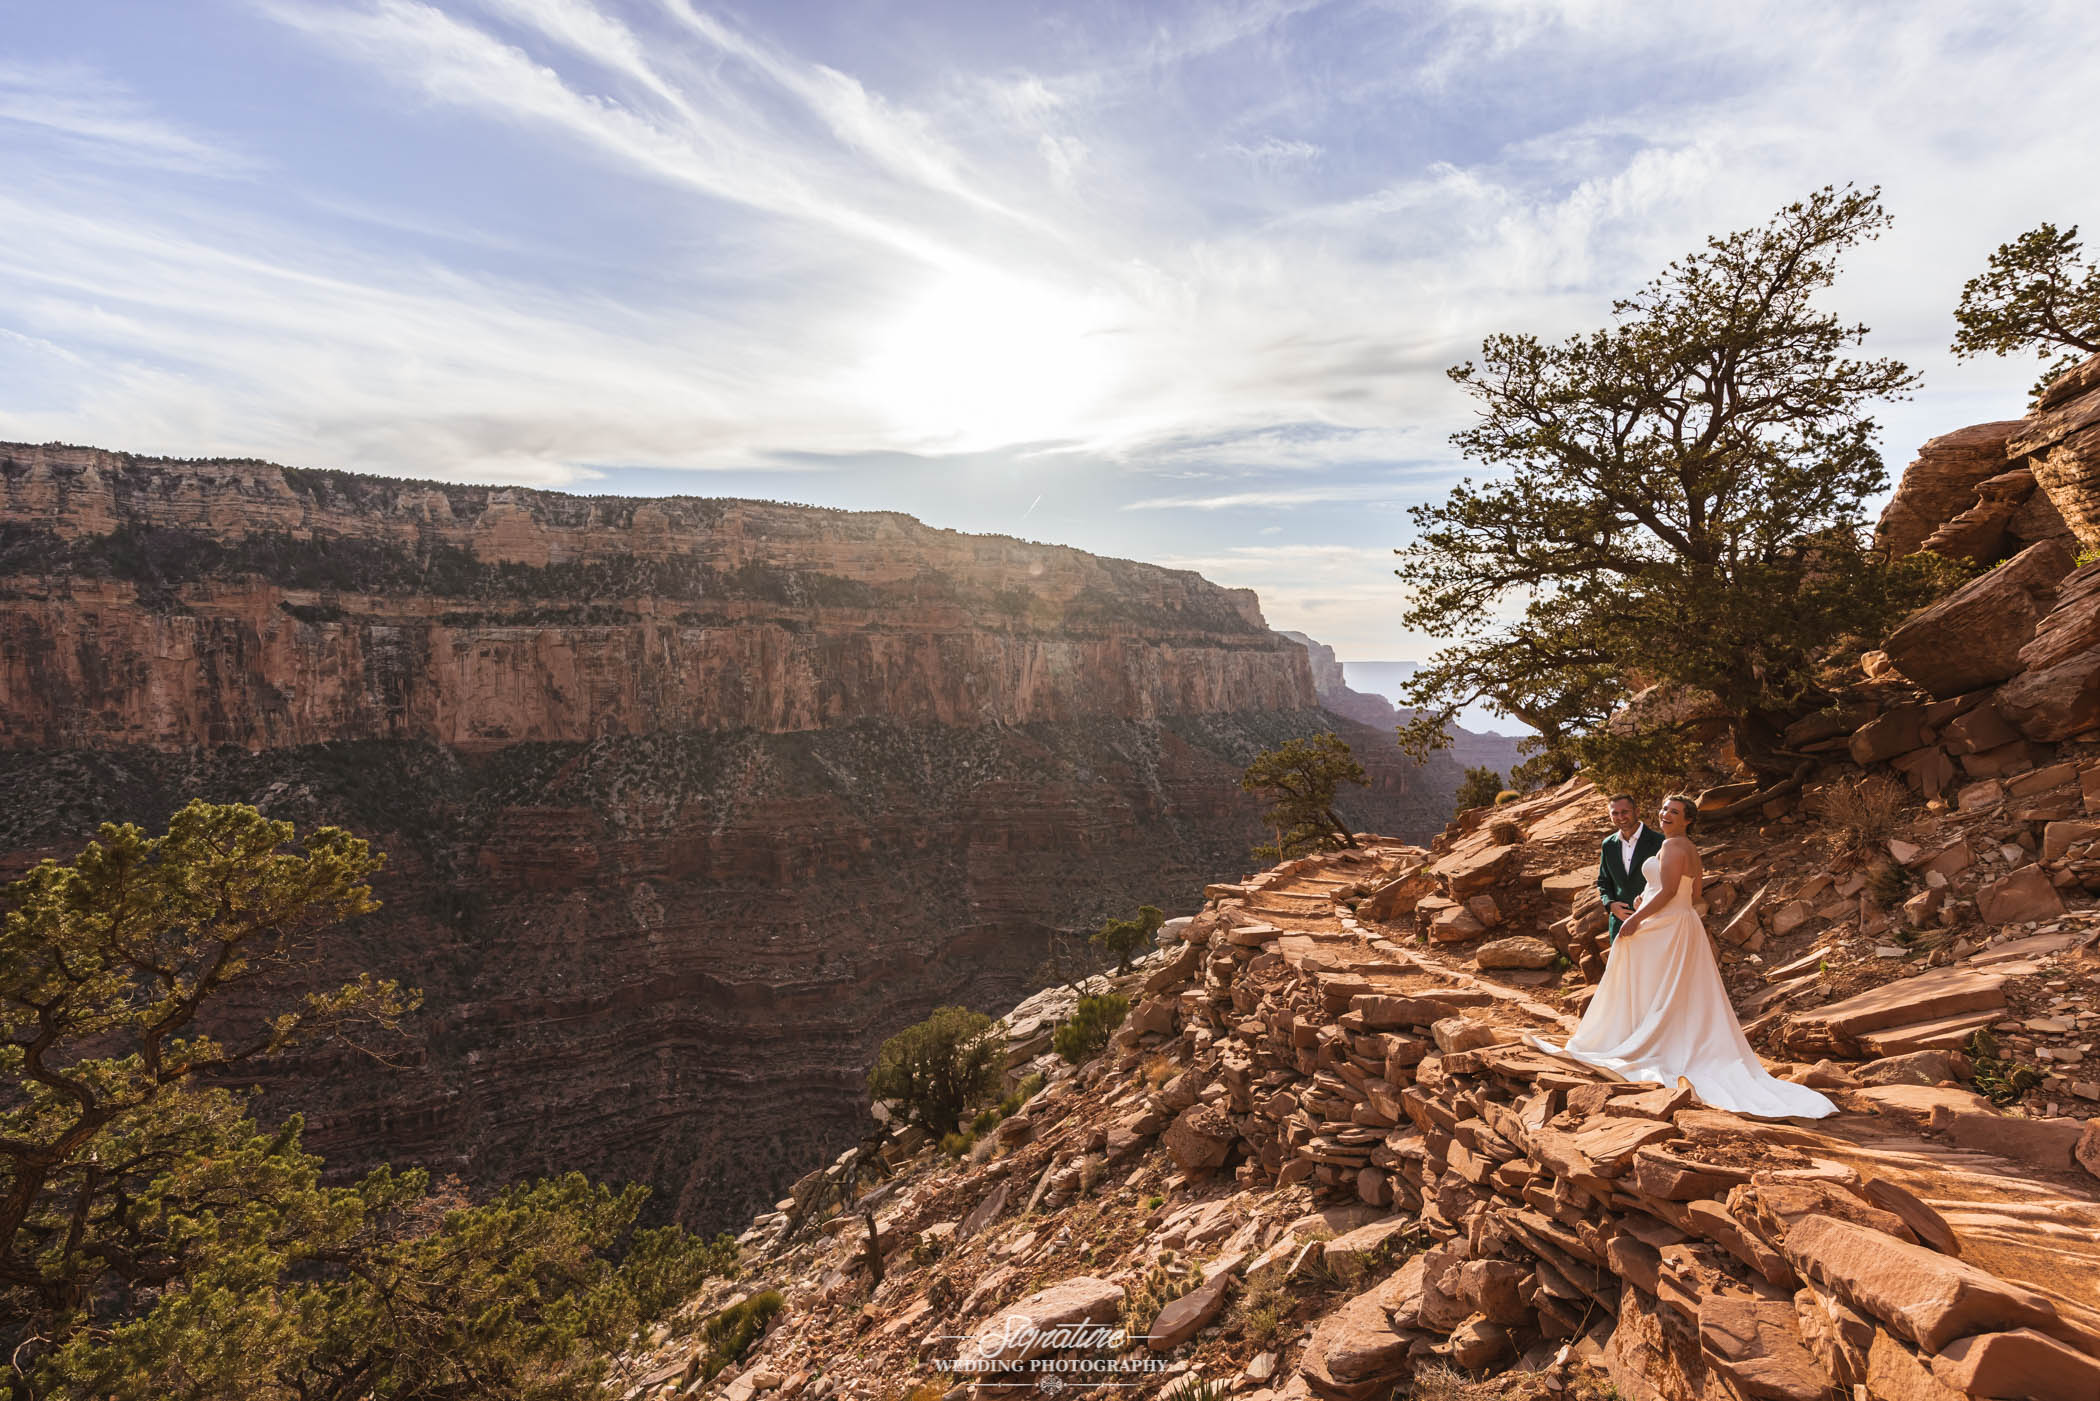 Bride and groom on desert mountain path